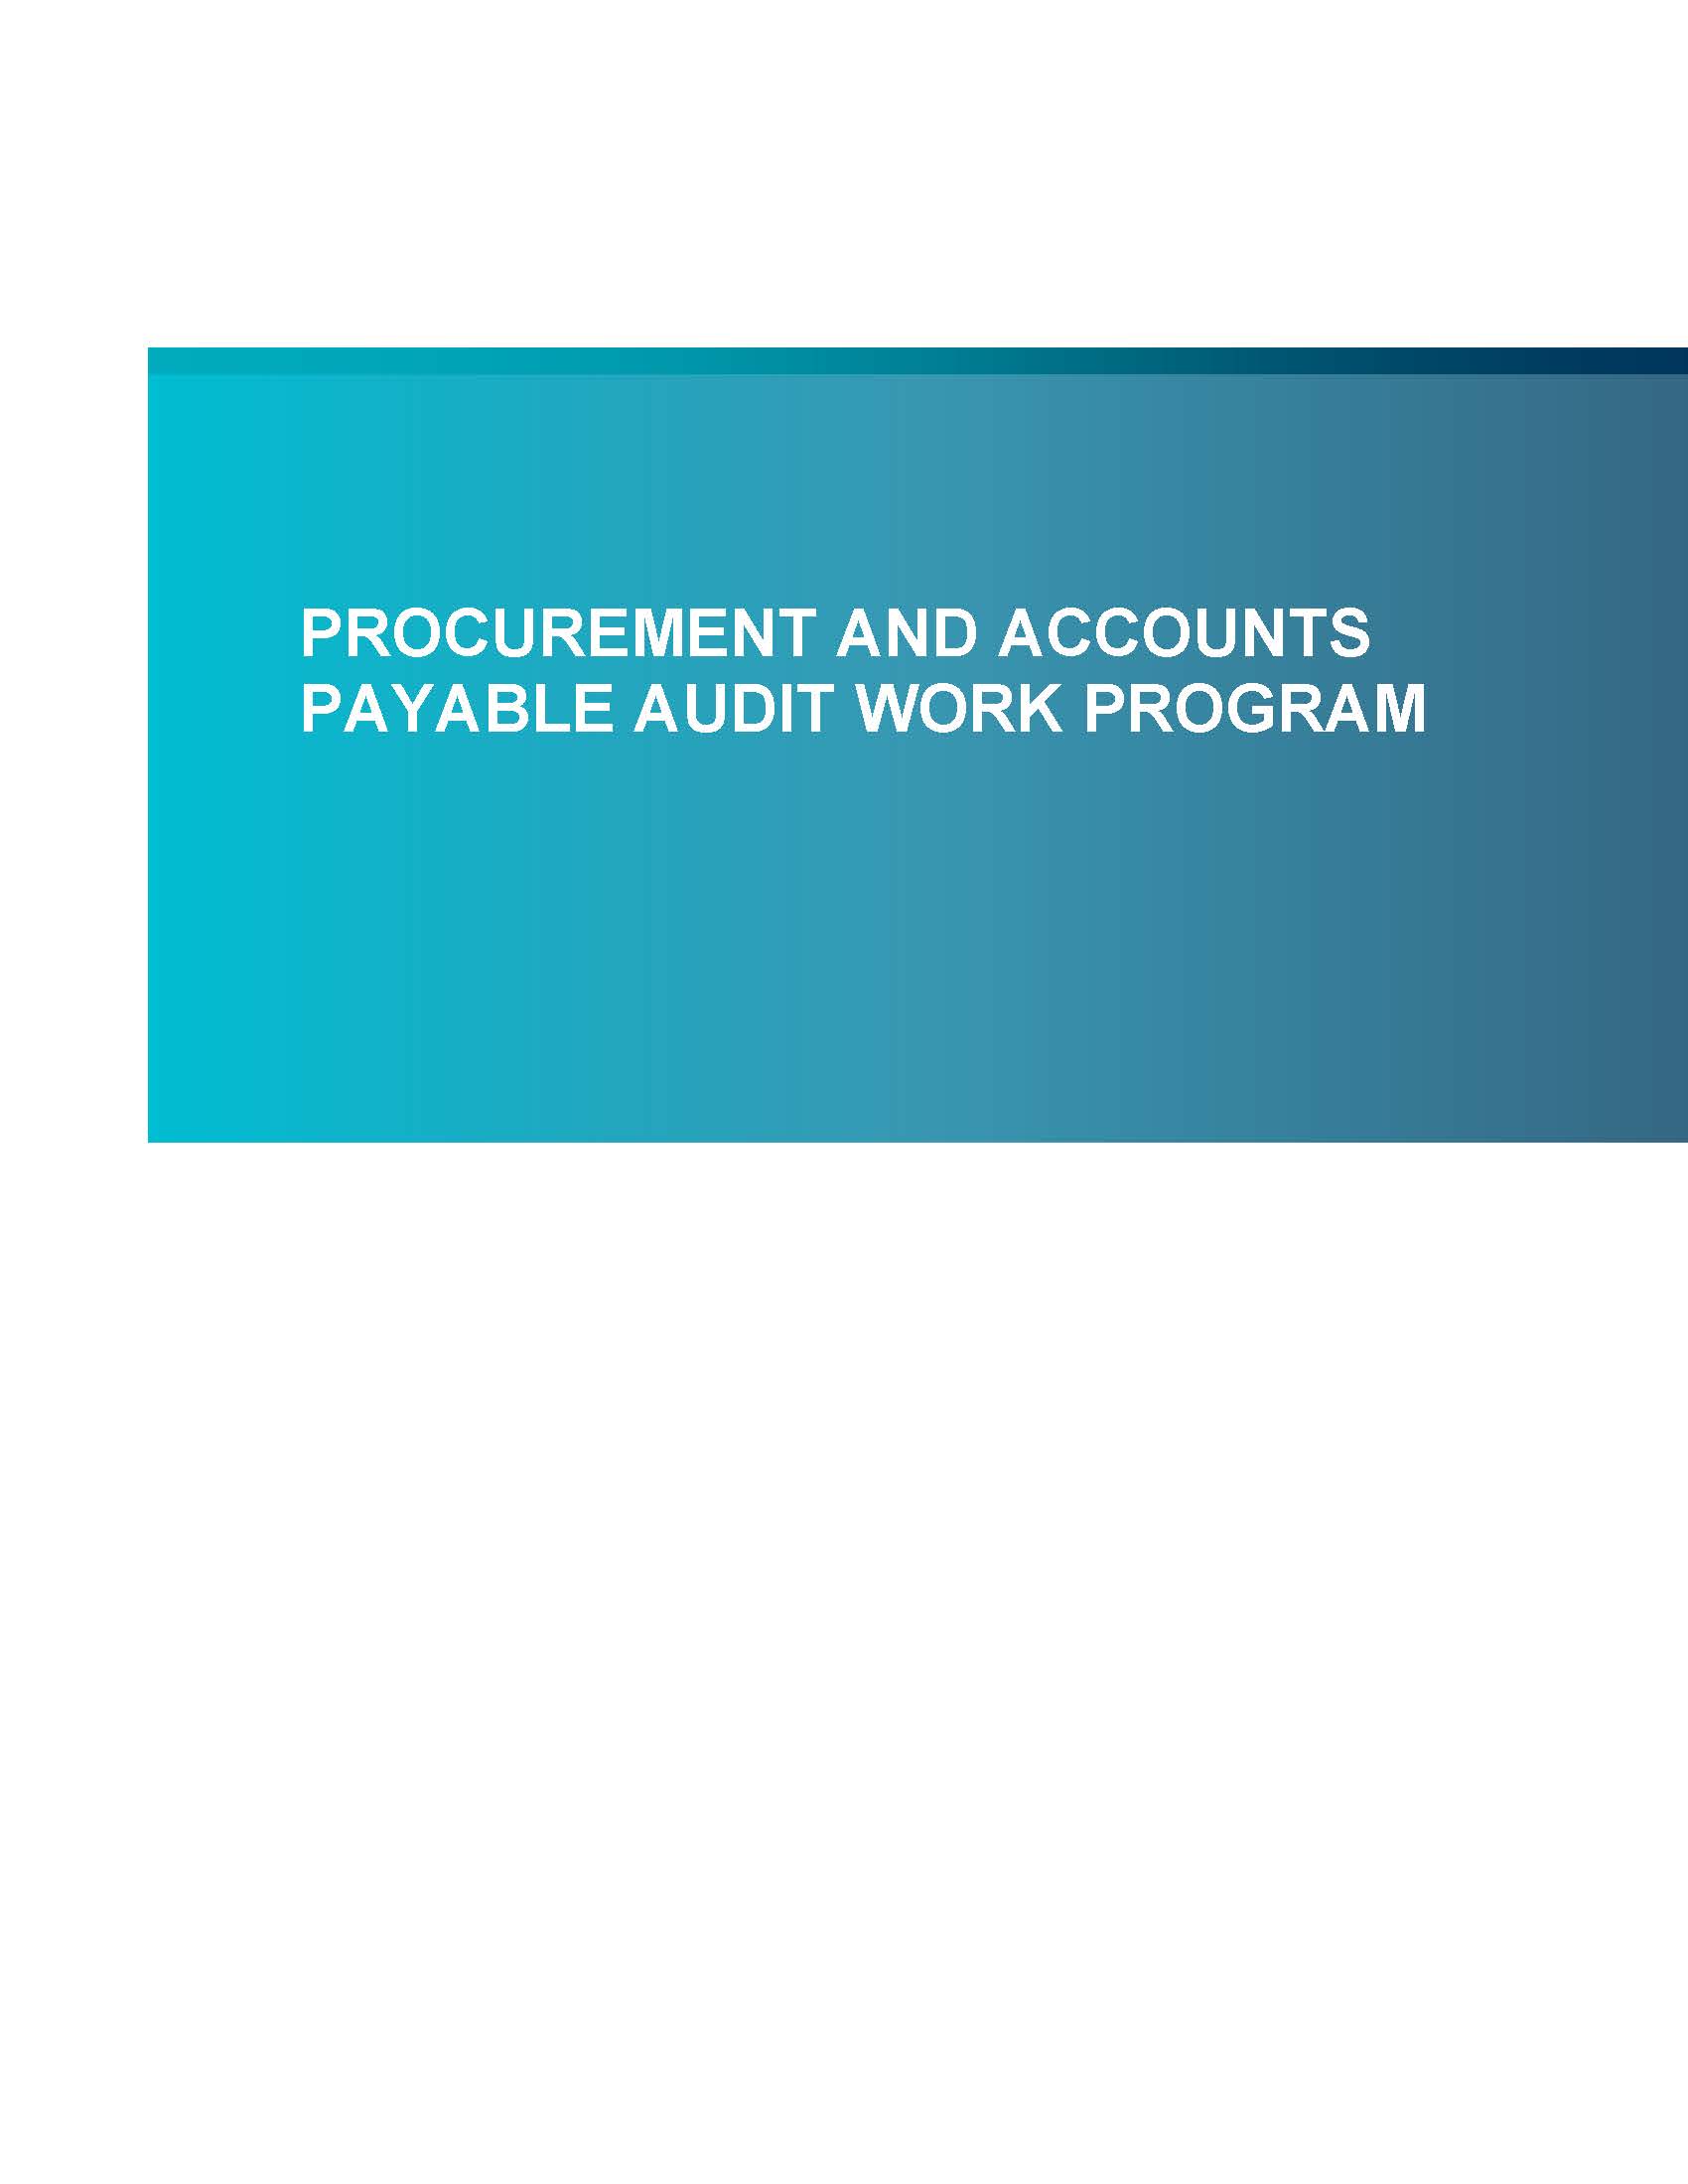 Screenshot of the first page of Procurement and Accounts Payable Audit Work Program